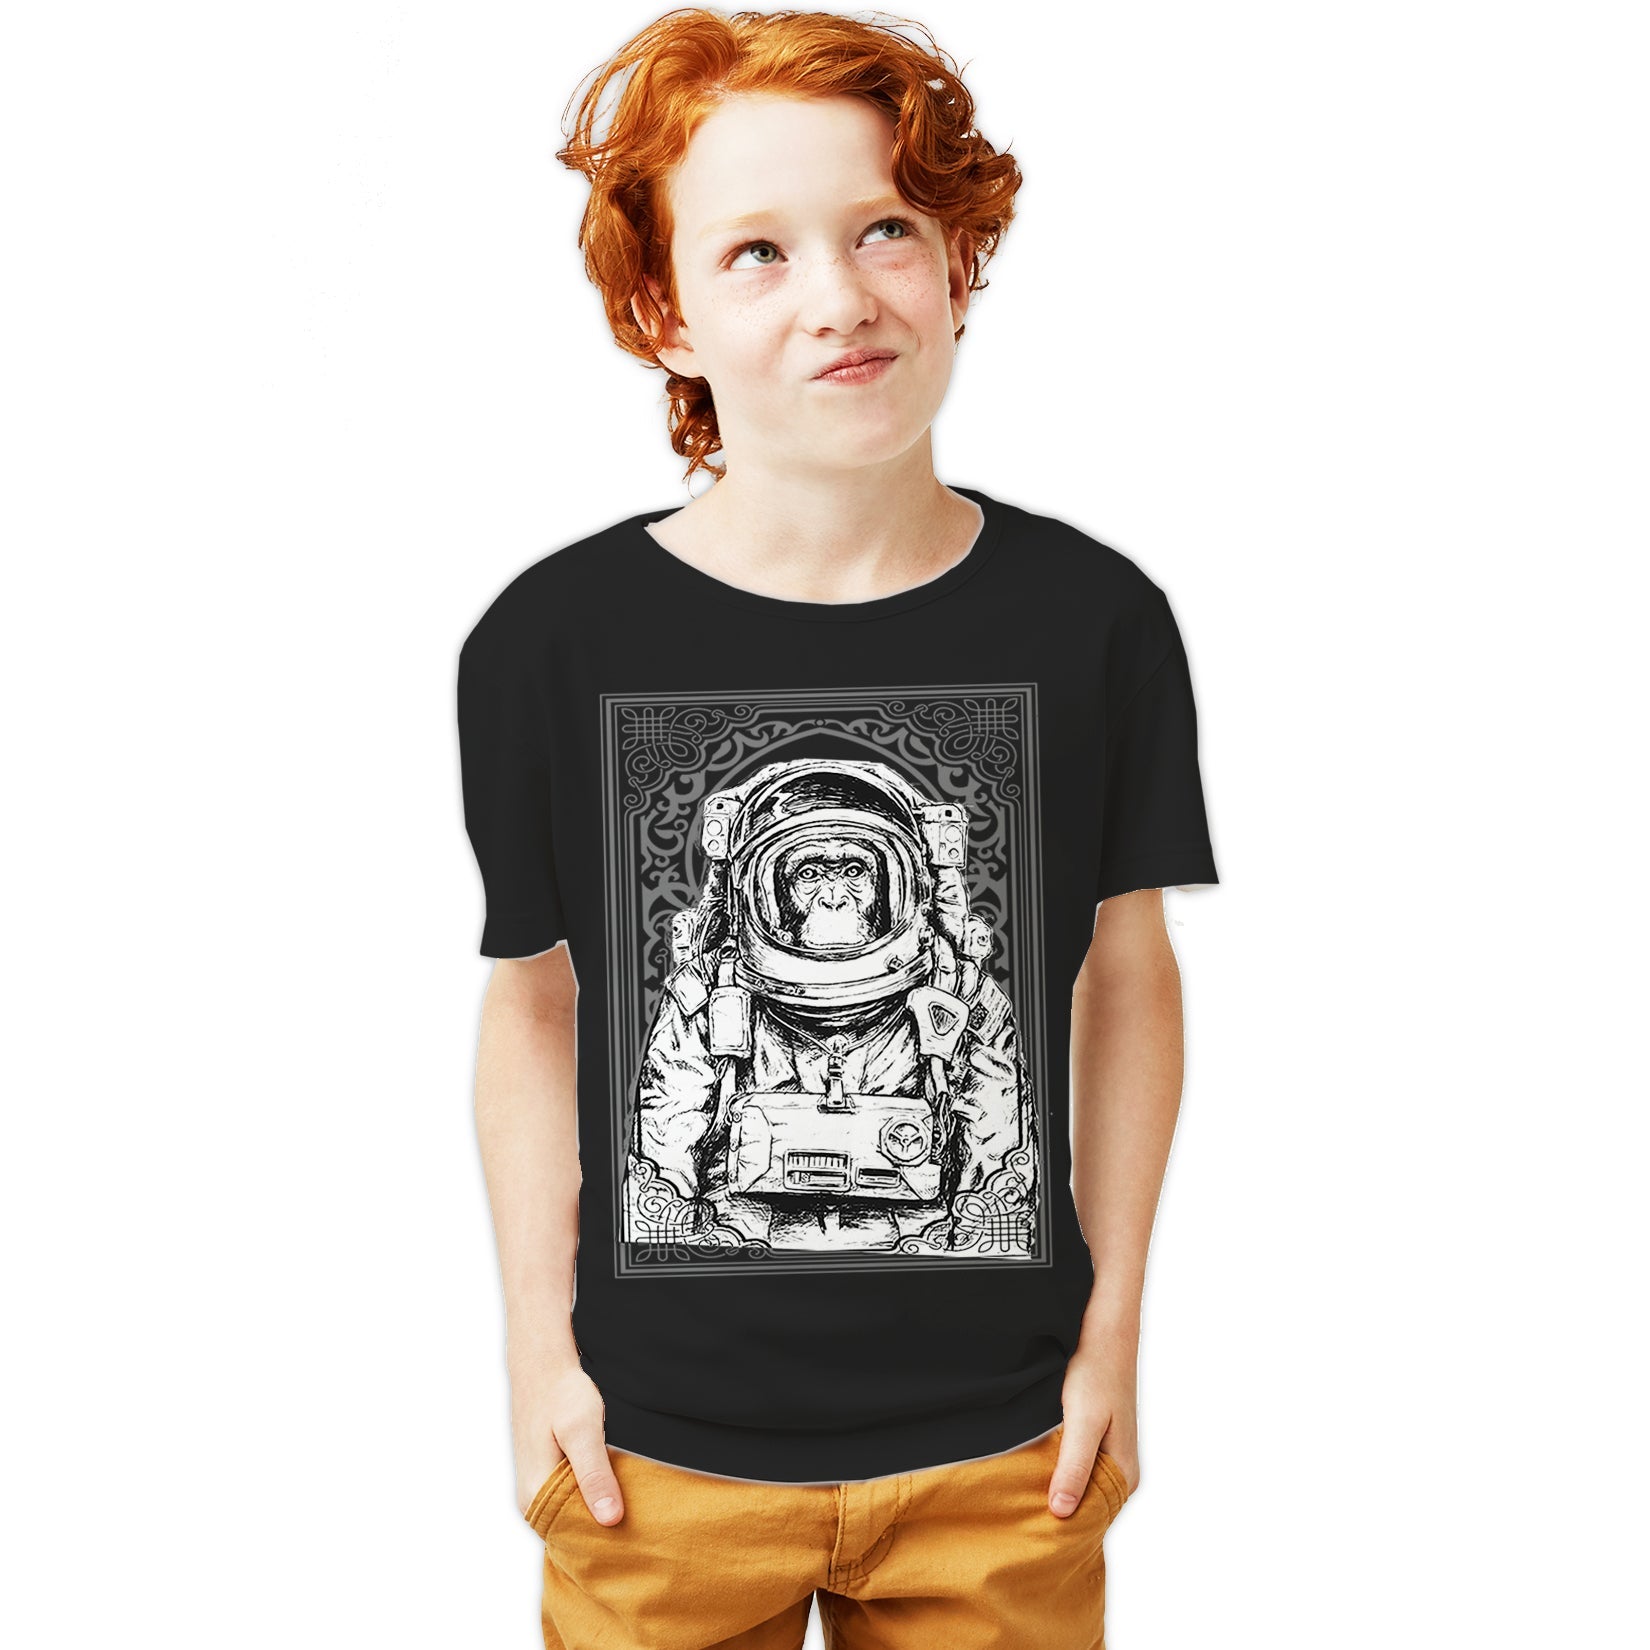 Science Space Monkey Astronaut Launch Nerdy Geek Chic Ironic Official Youth T-shirt